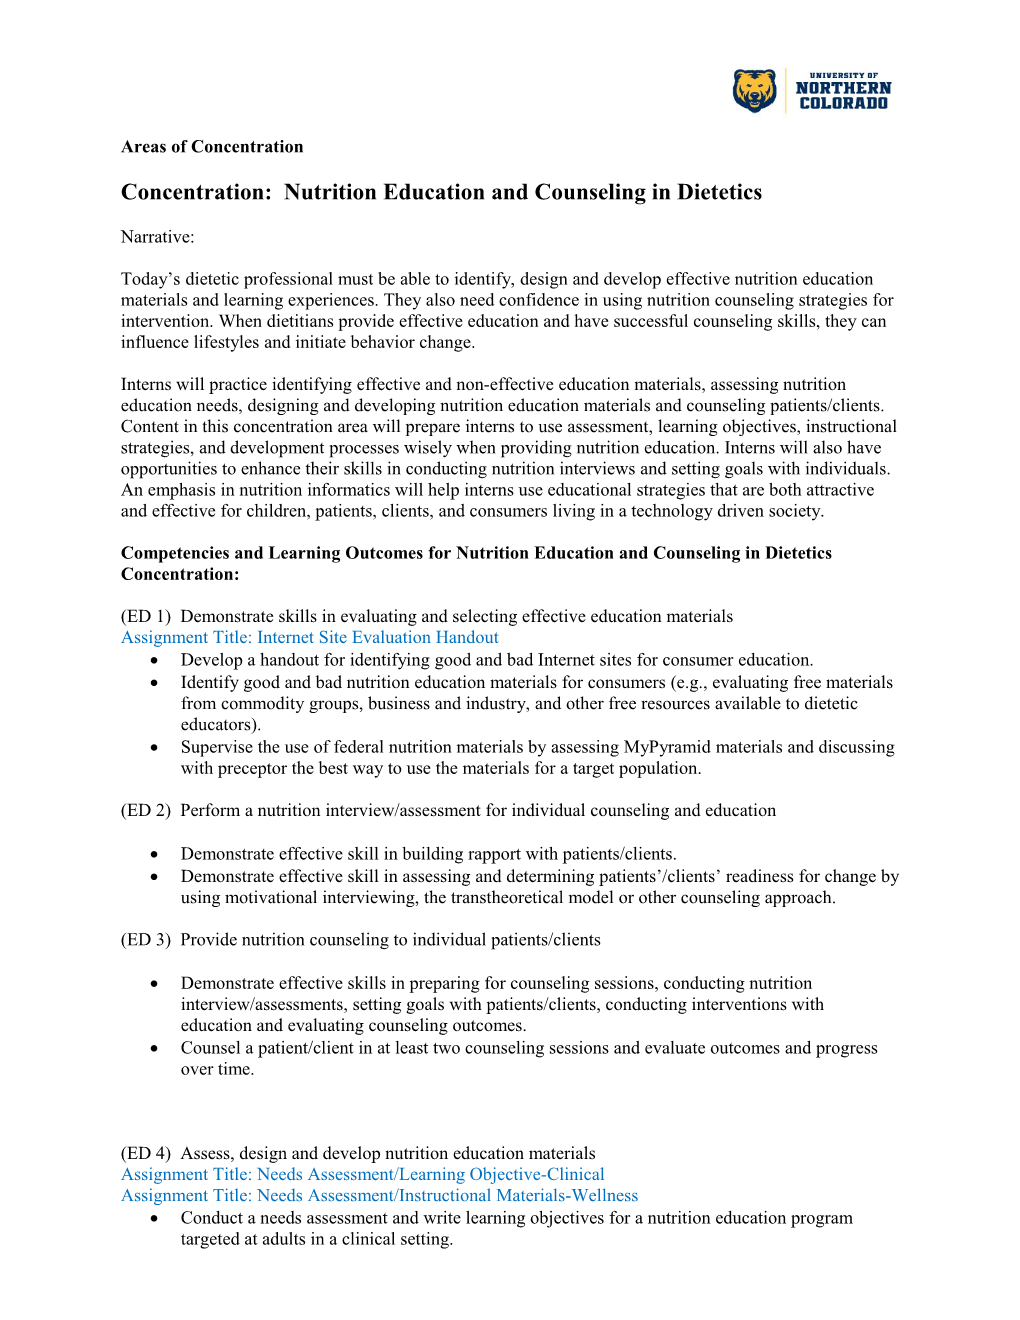 Concentration: Nutrition Education and Counseling in Dietetics